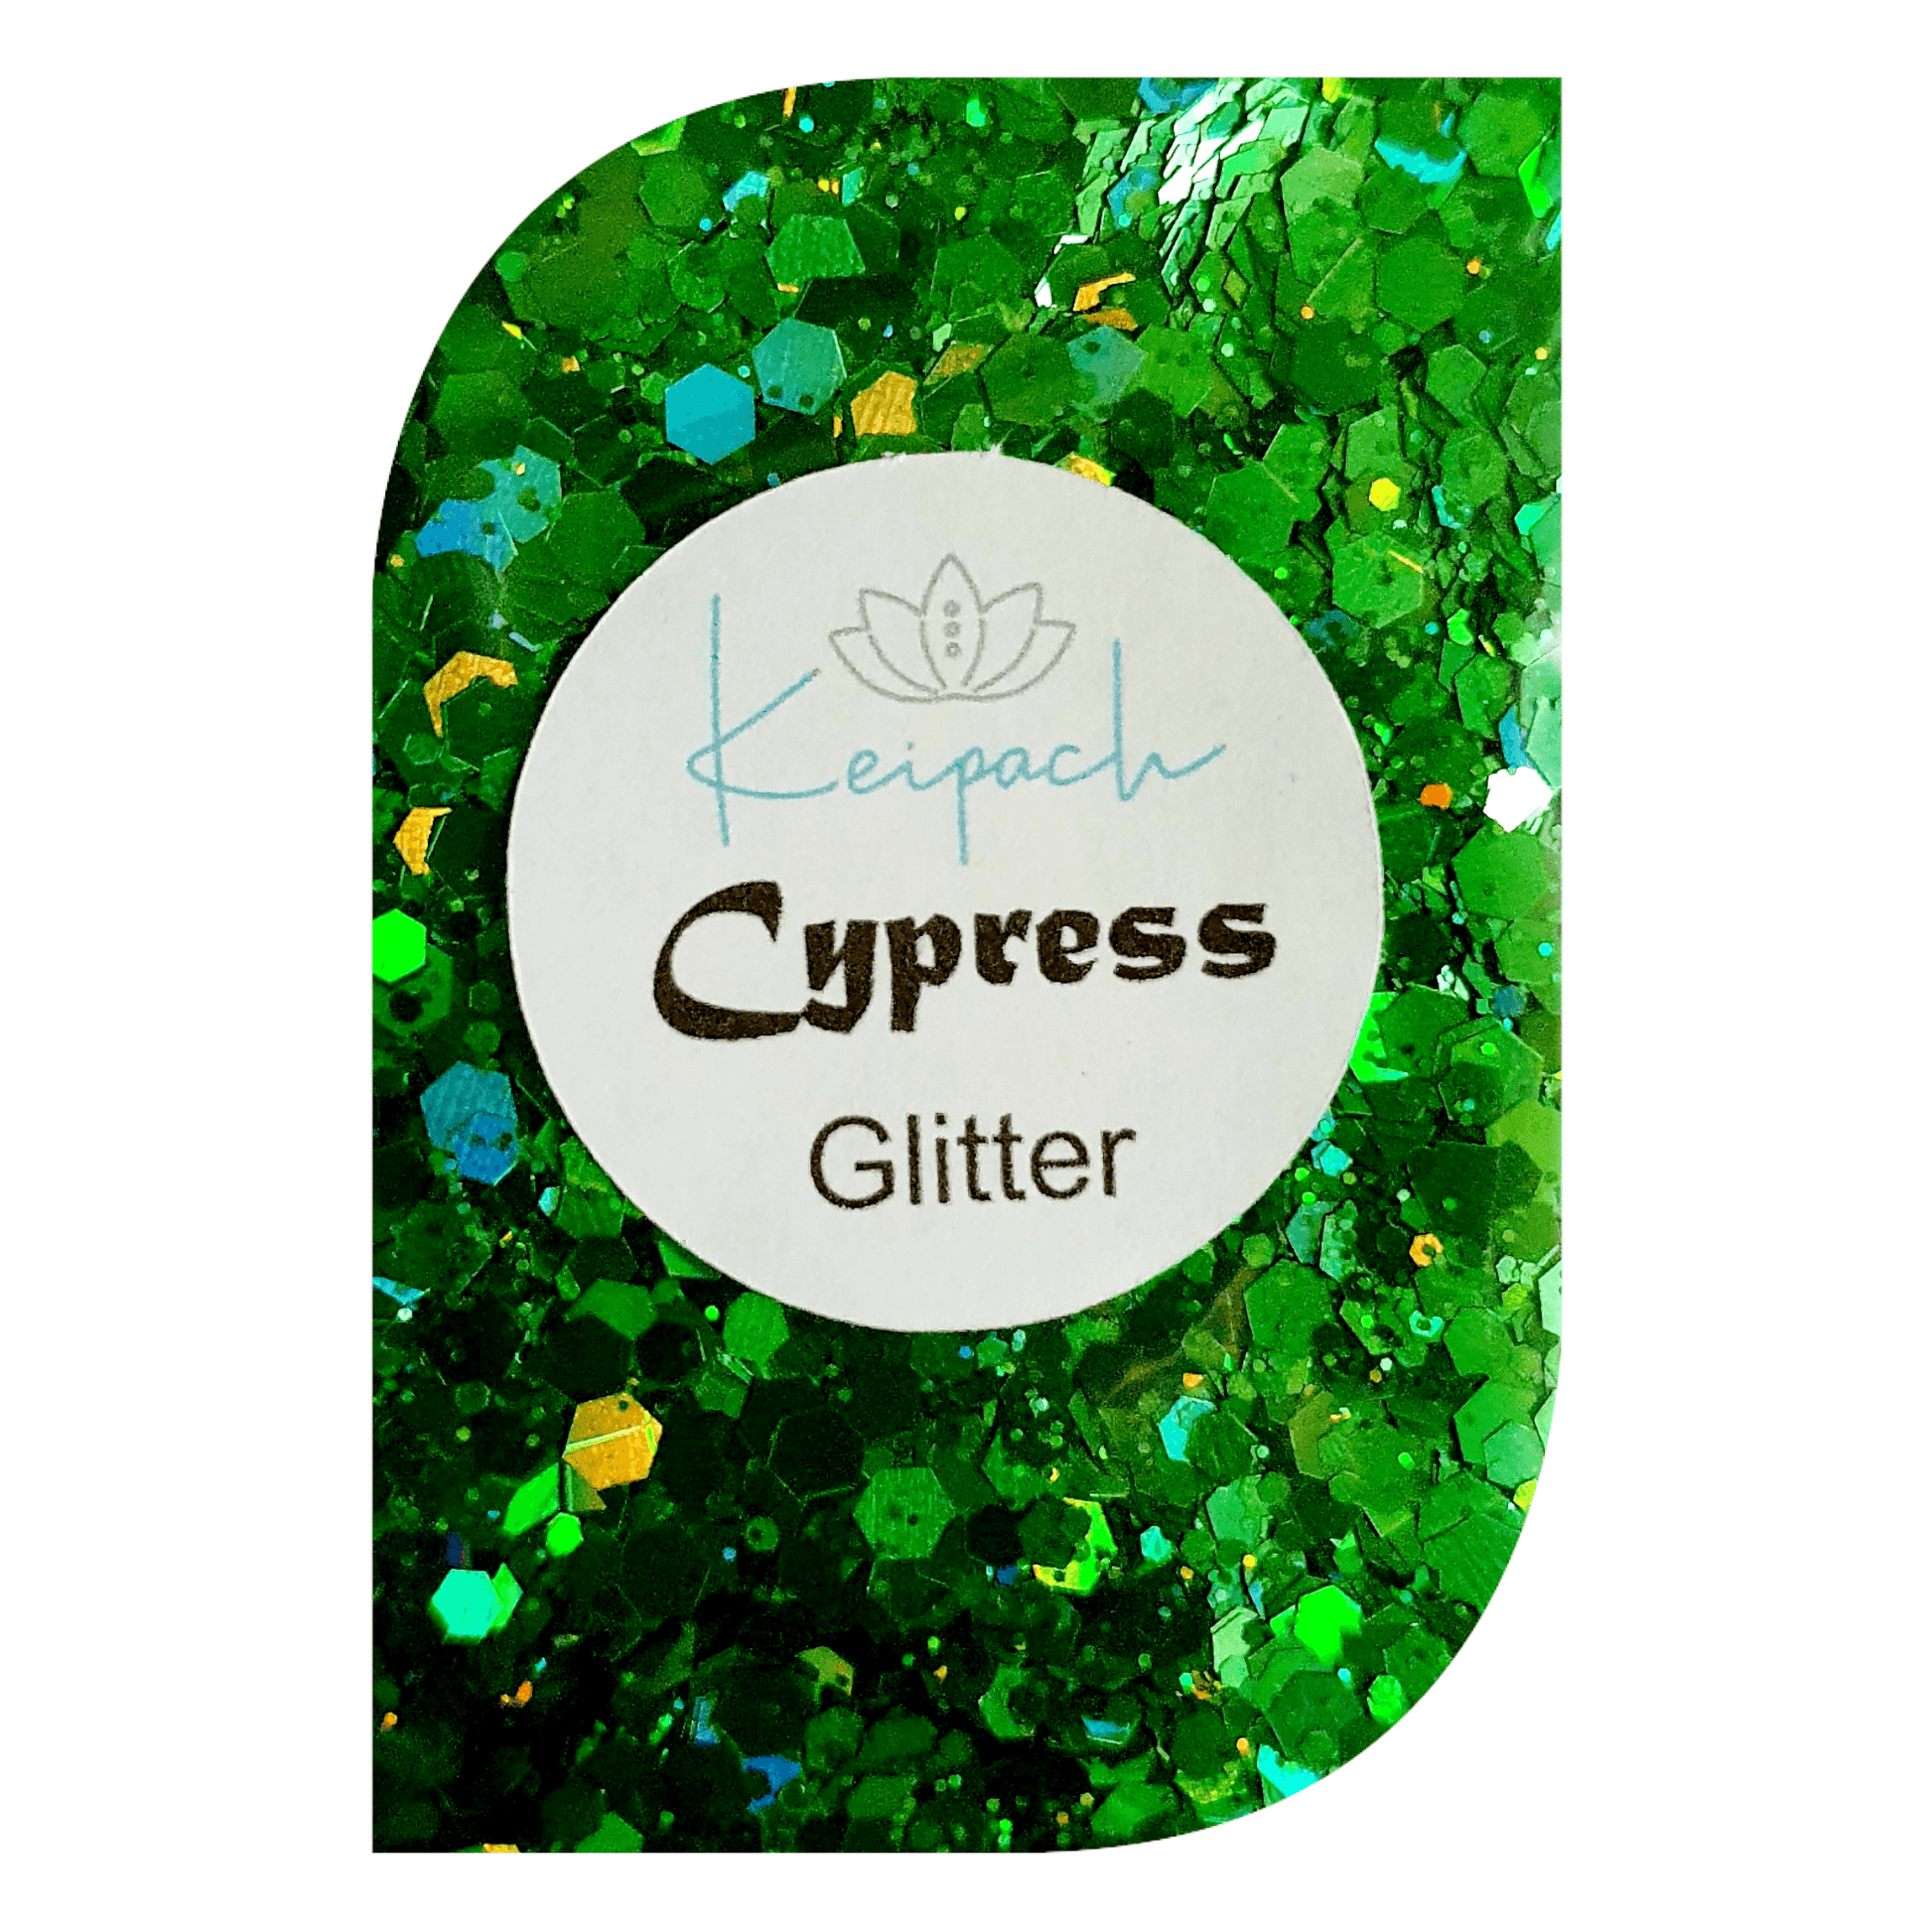 Chunky Holographic Glitter - Cypress - Keipach